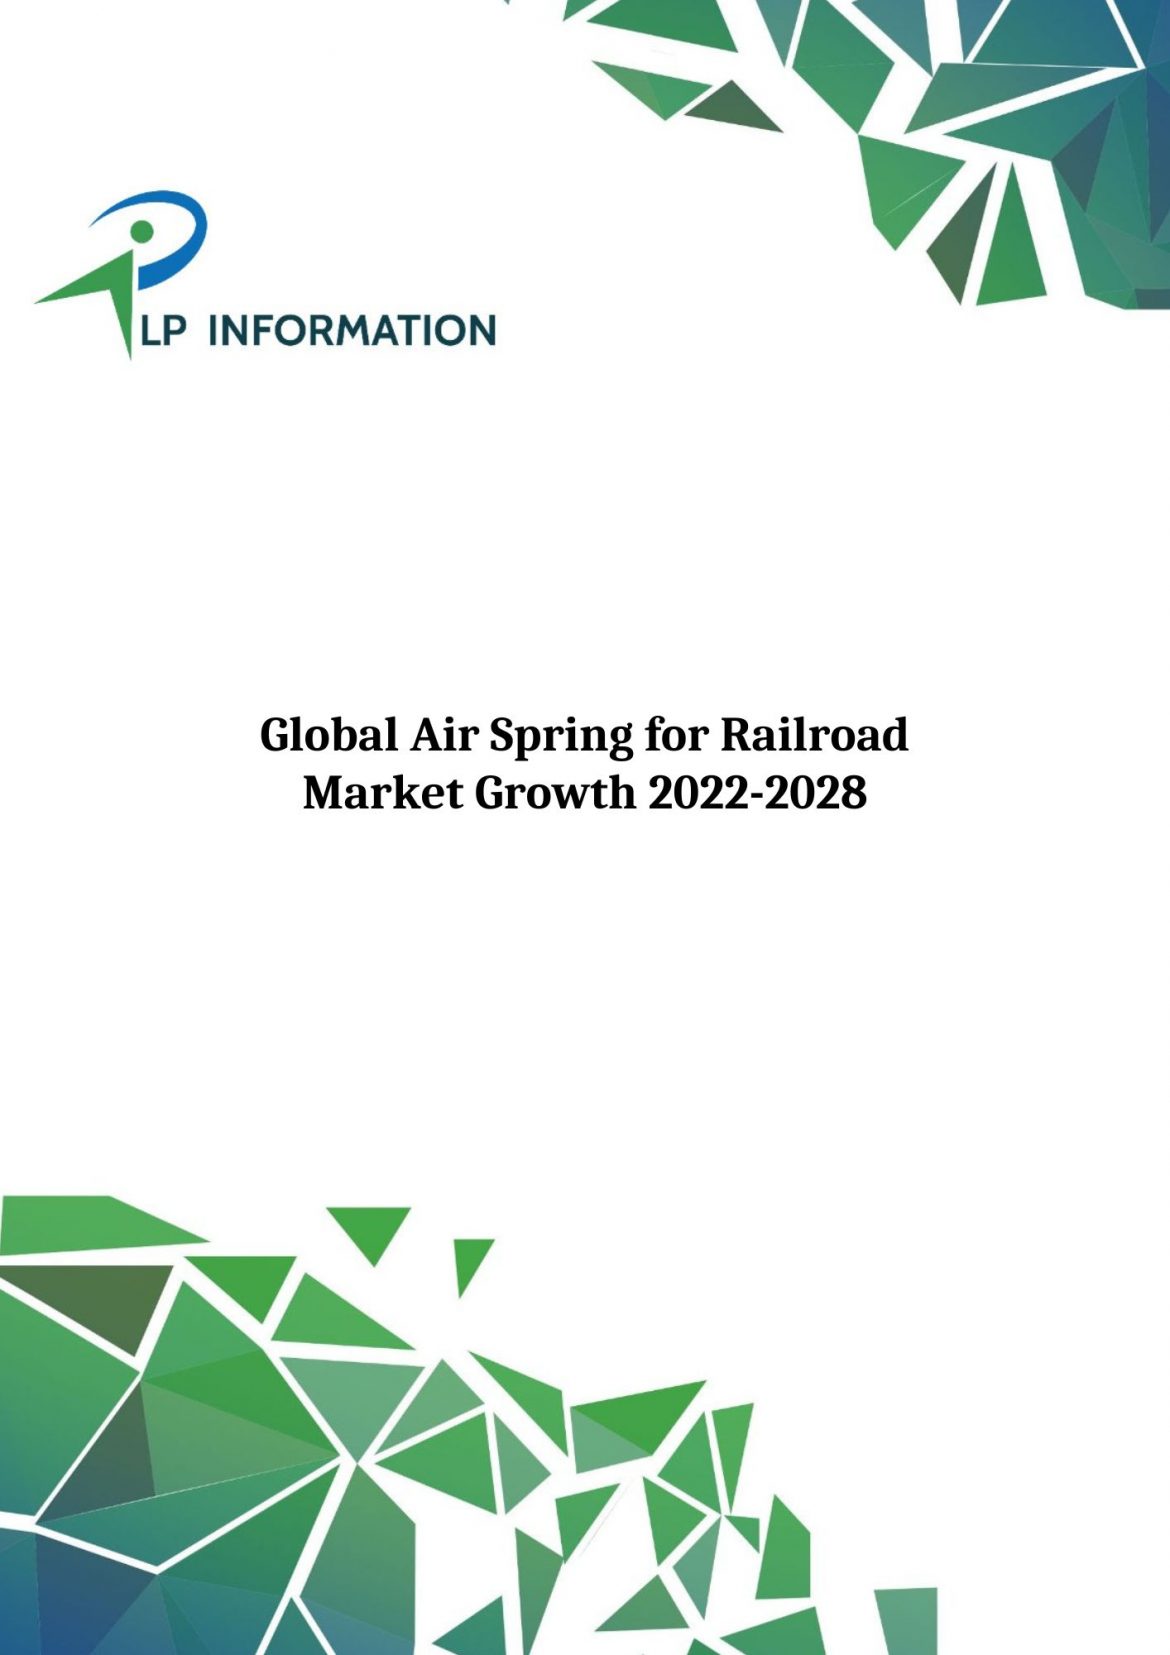 Global Air Spring for Railroad Market Growth 2023-2029